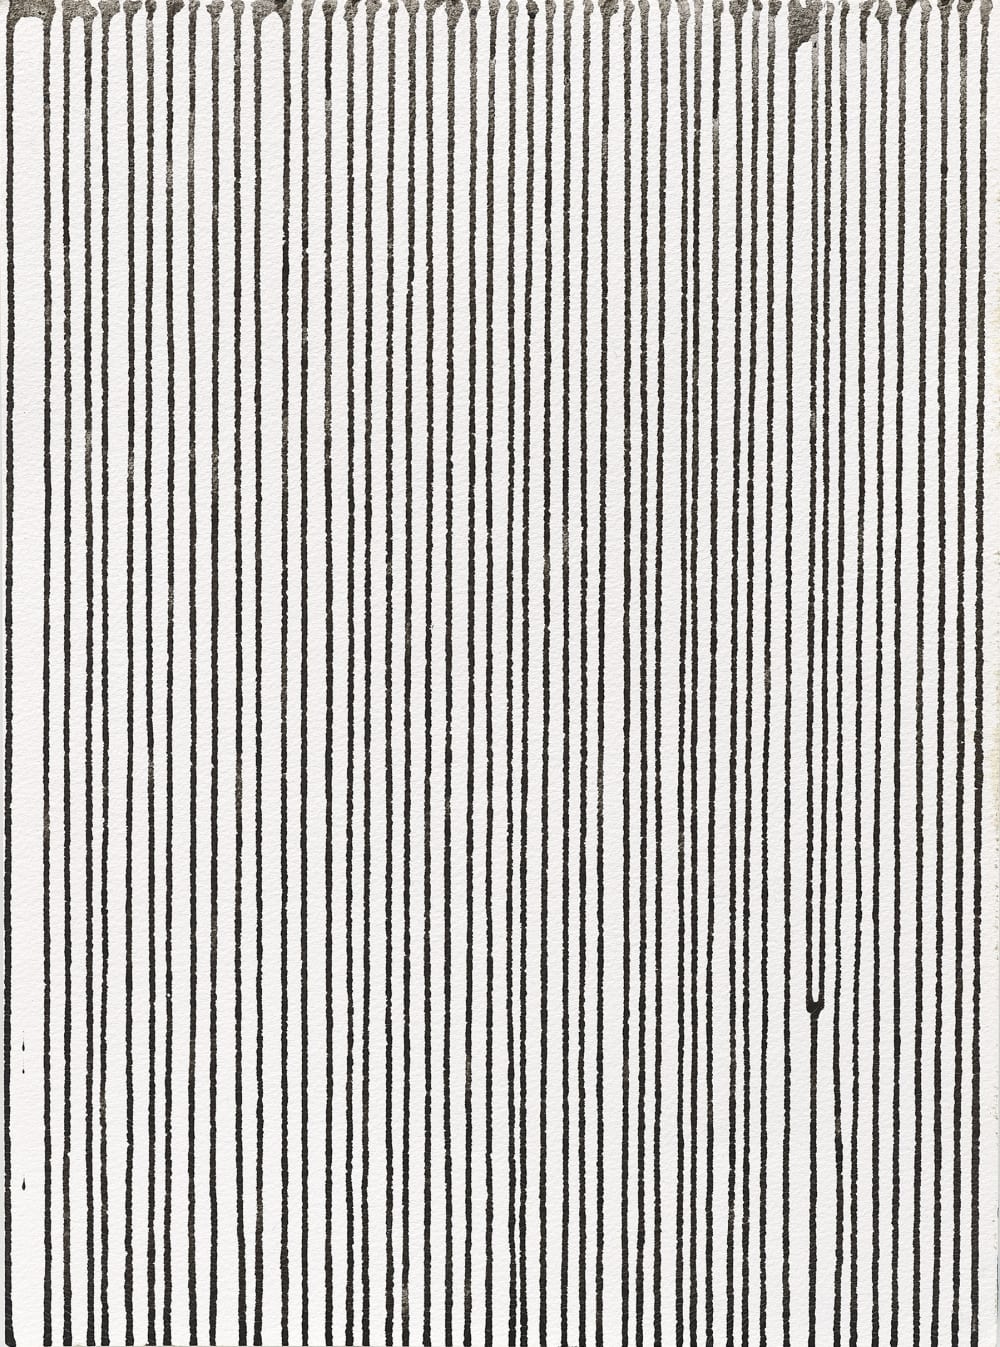 Poured Lines: Black Ink on White Paper, 2001